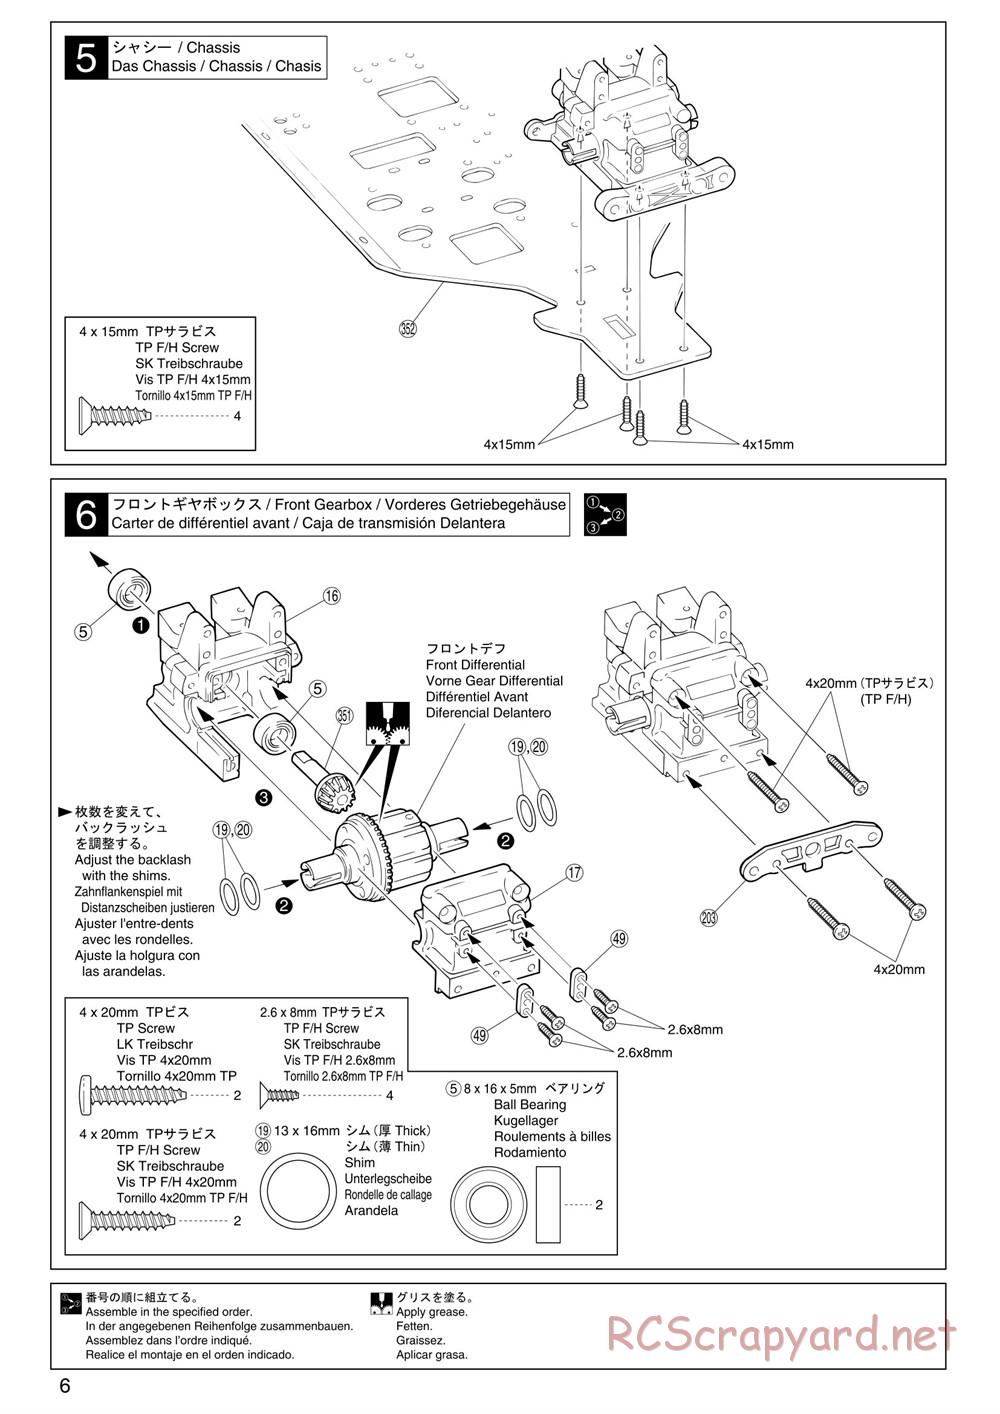 Kyosho - Inferno ST (2005) - Manual - Page 6